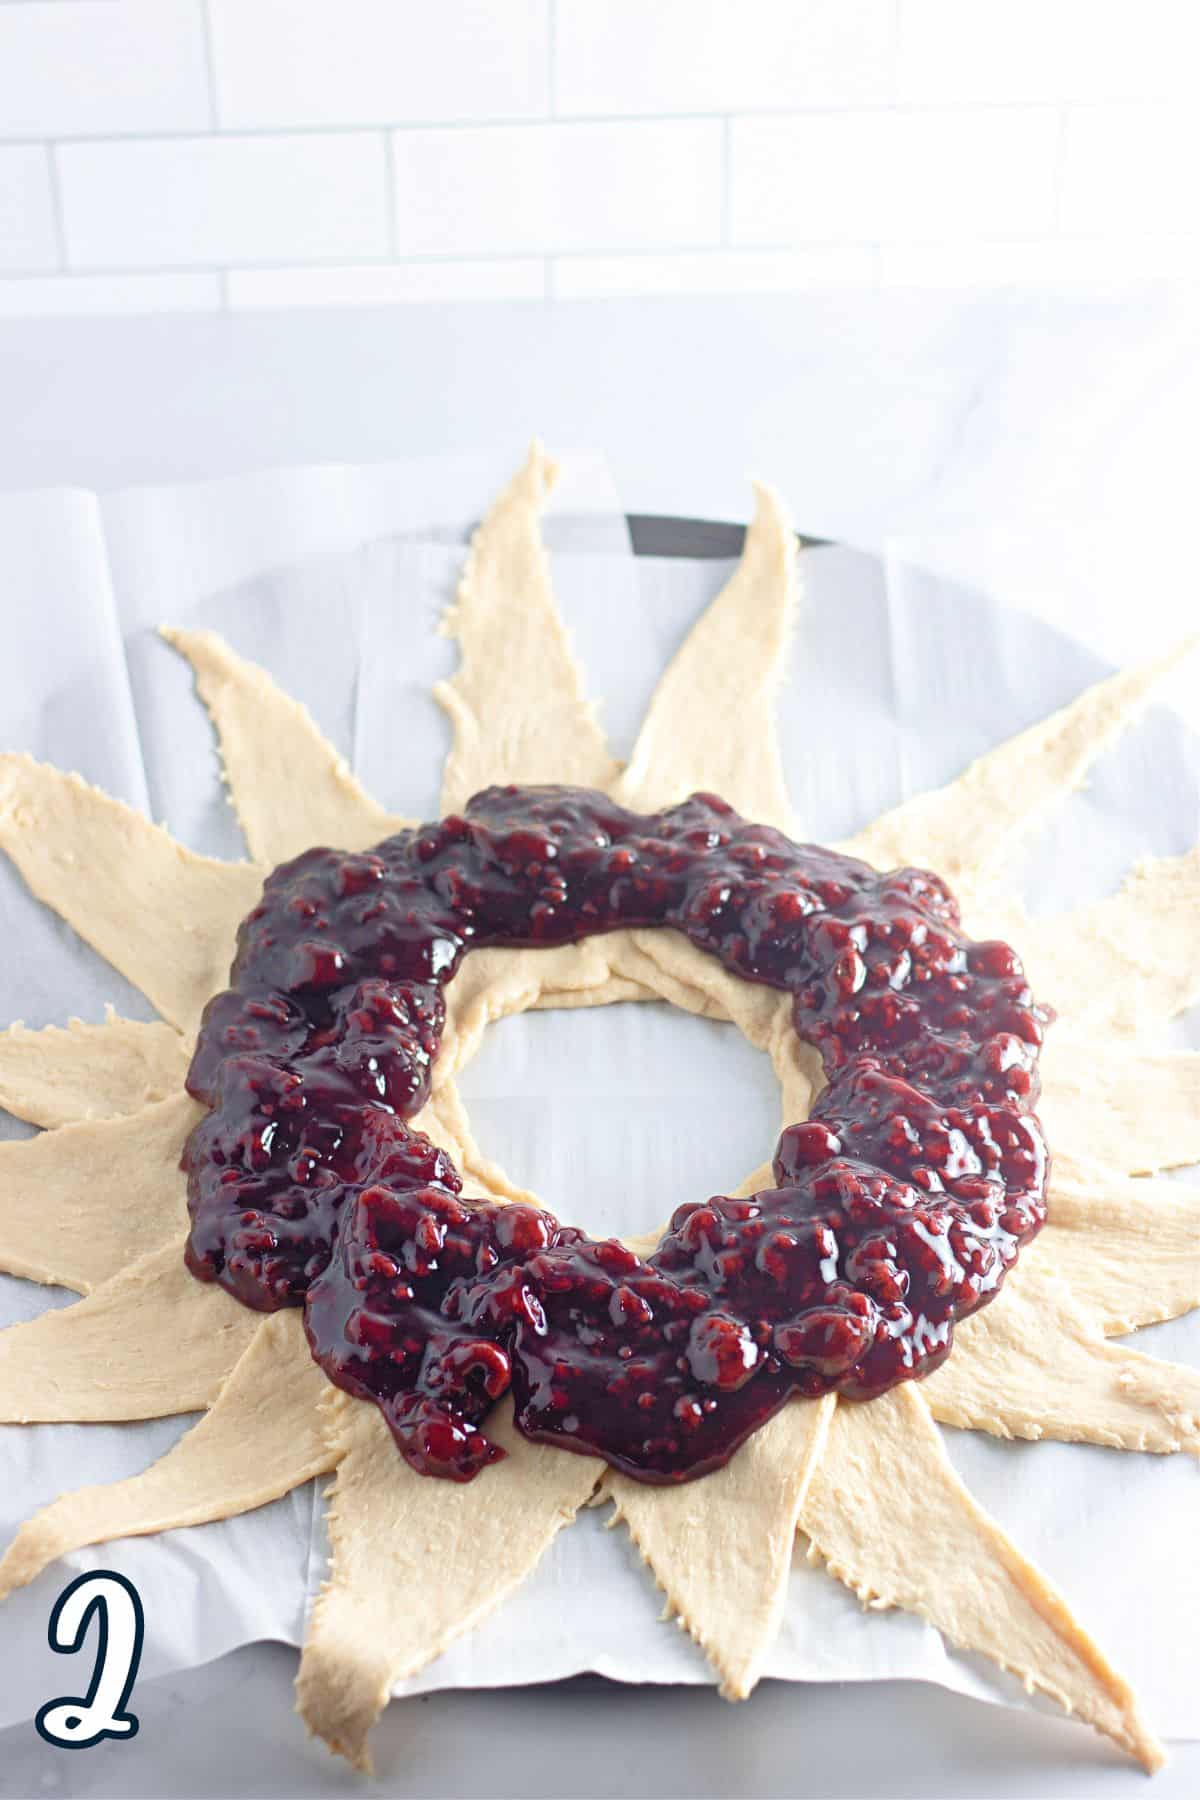 A raspberry wreath on a sheet of paper.